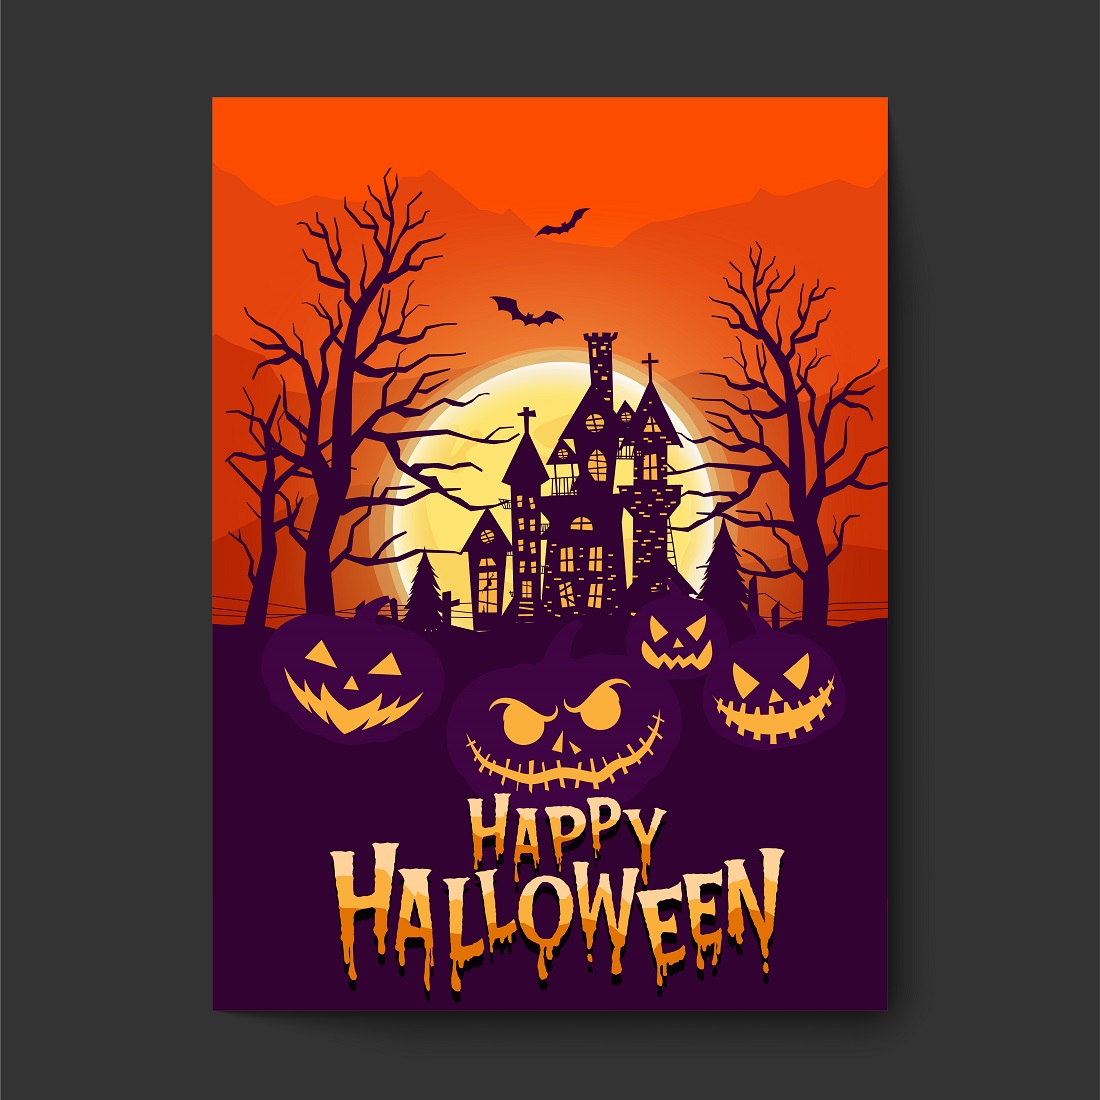 Happy Halloween Or Party Invitation Background With Pumpkins